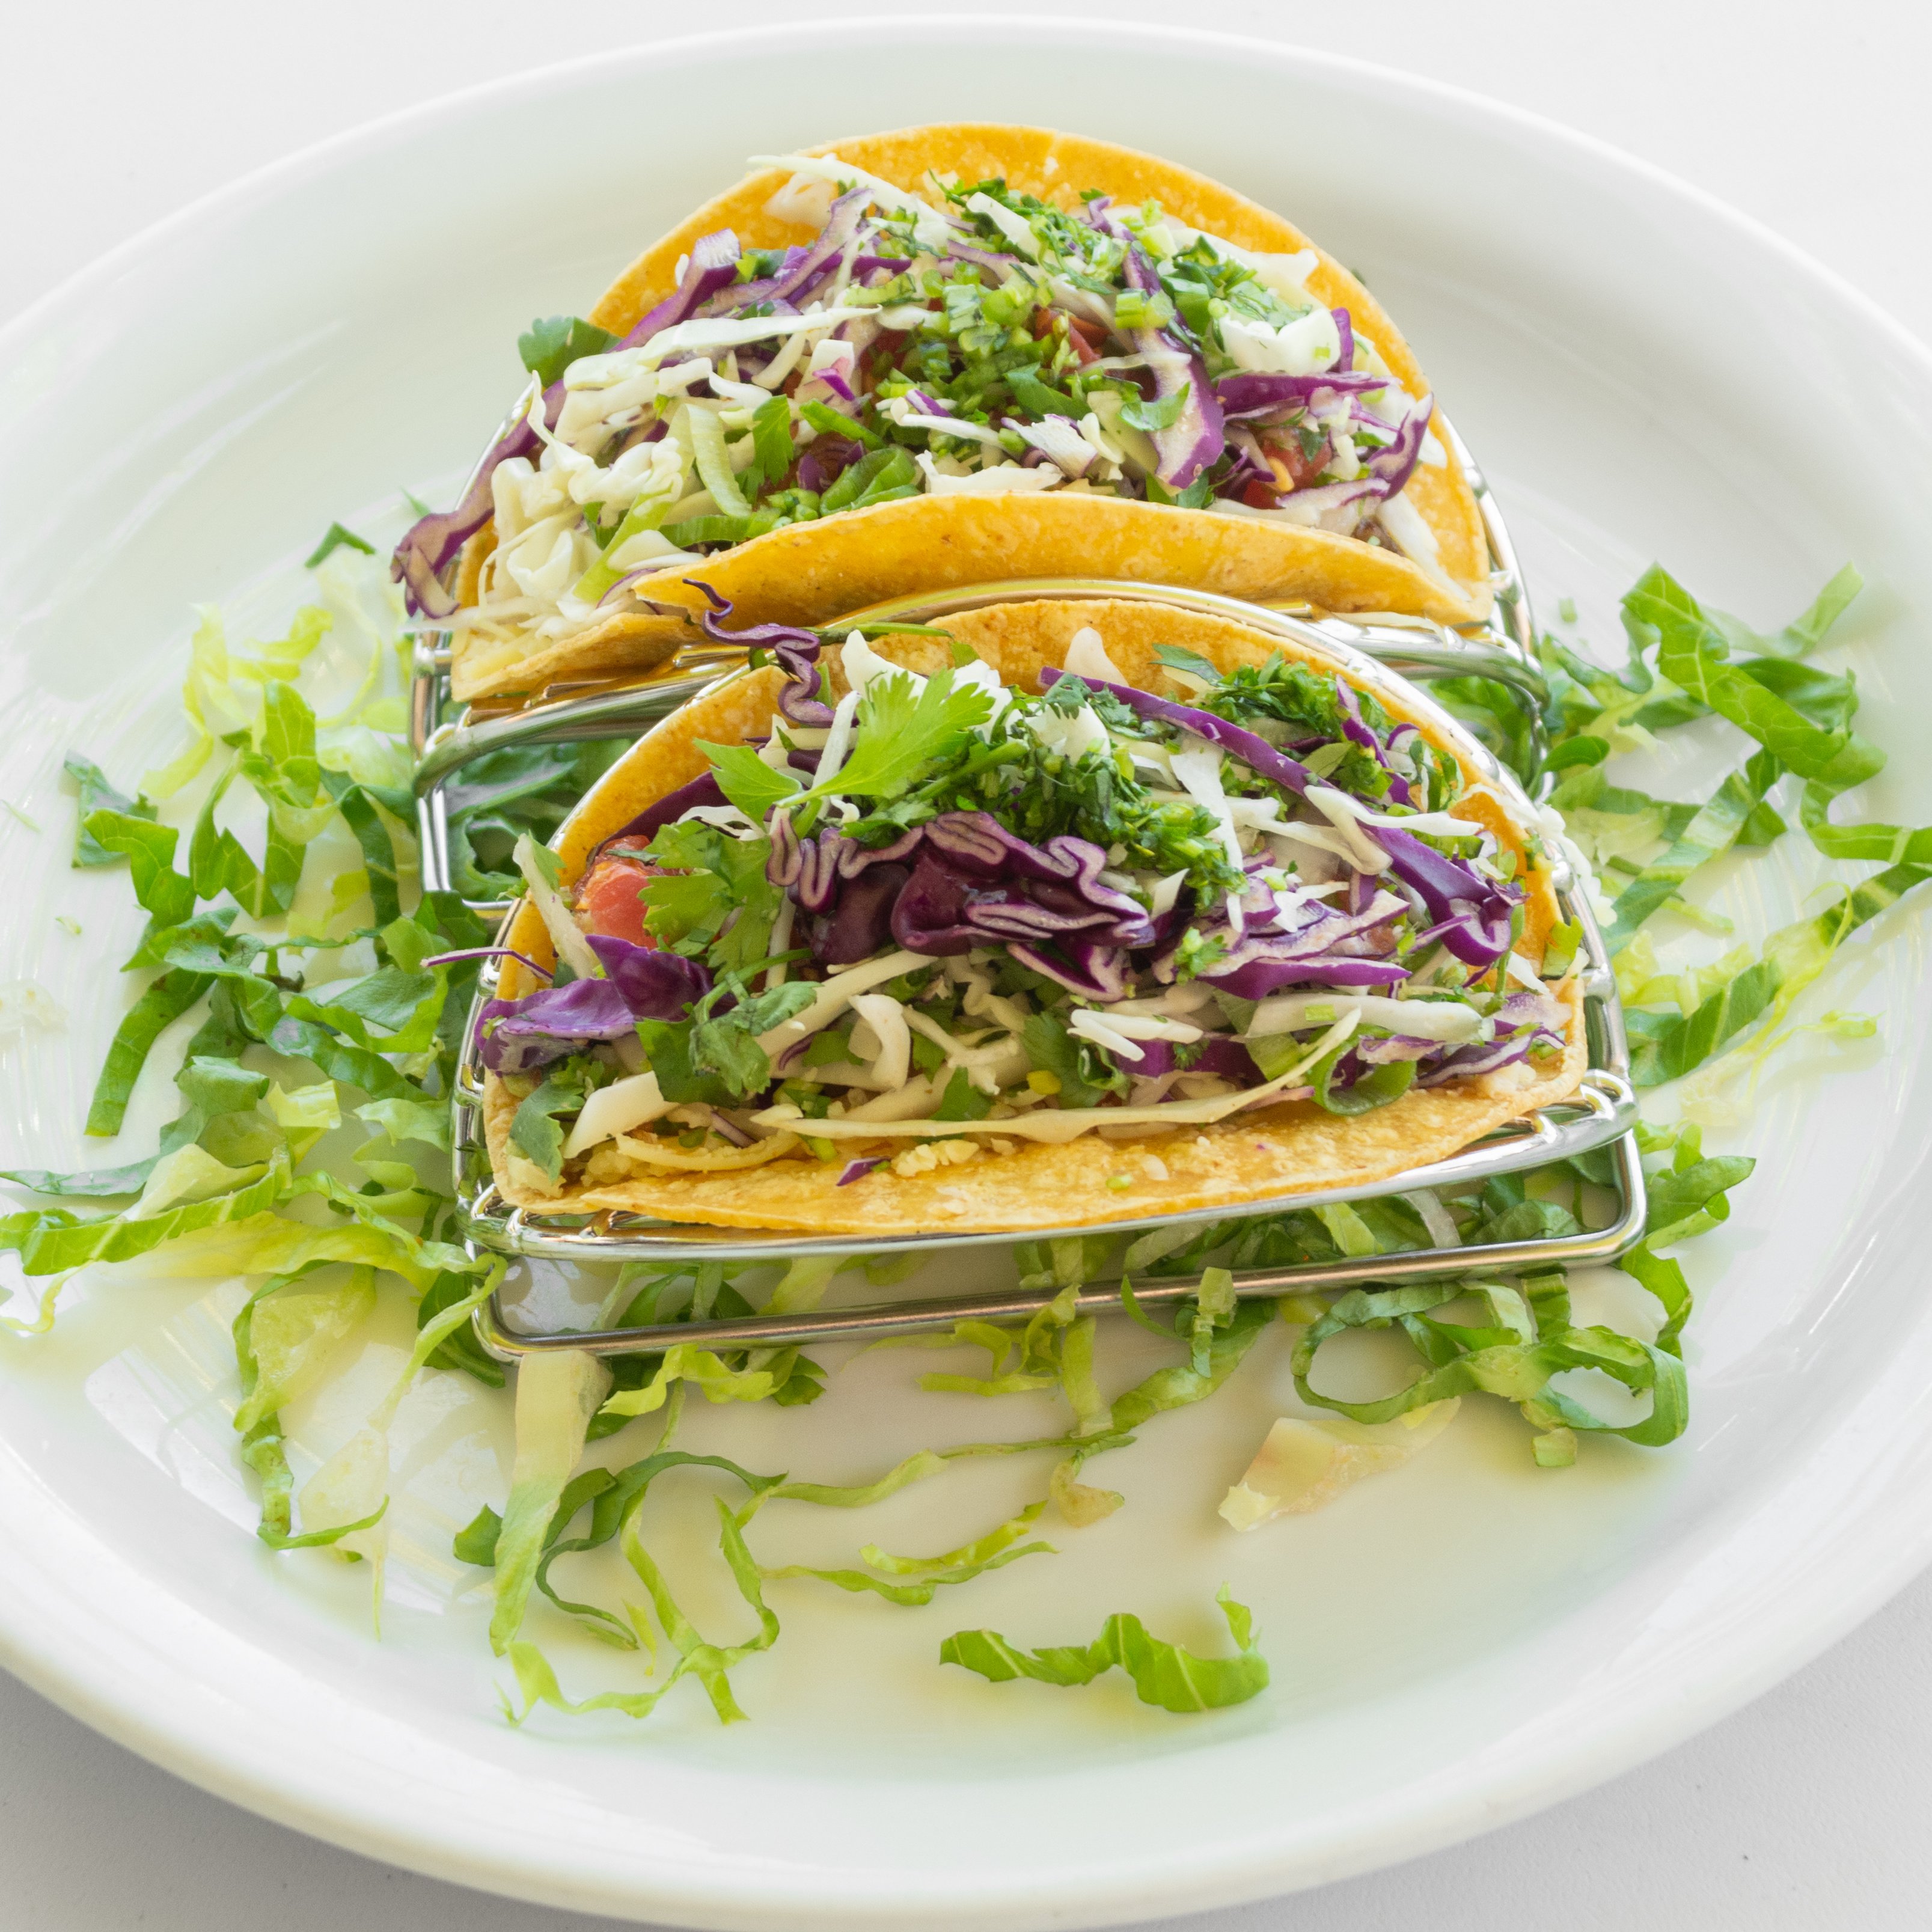 Tasty Tacos: Fresh and Flavorful Options